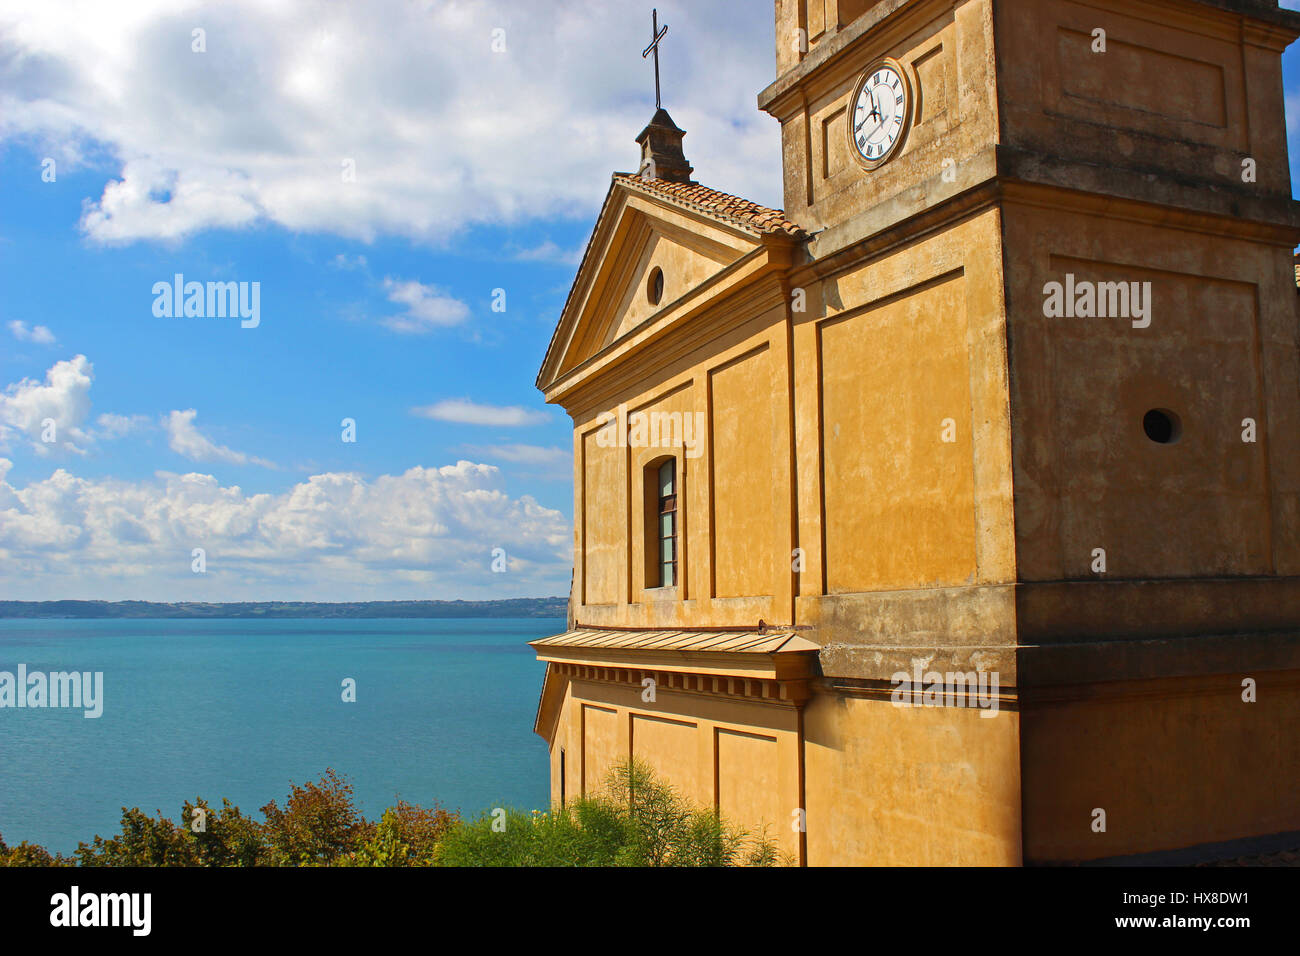 This is the Main Church of Trevigano Romano, a very nice and little village on the Bracciano Lake, near Rome, Italy. This shot has been taken in a cle Stock Photo